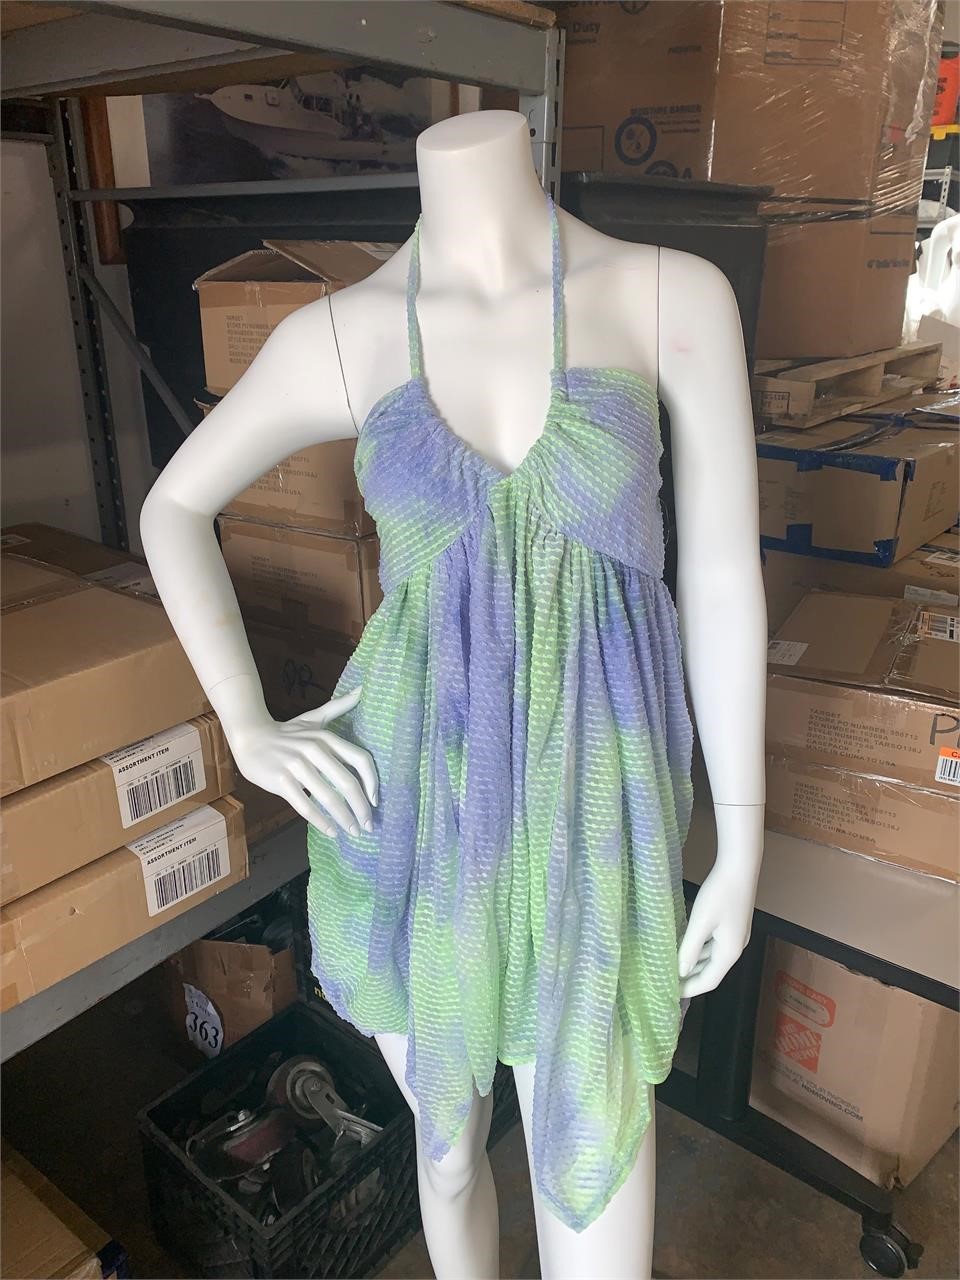 4/19 NEW CLOTHING, BULK LOTS, RESELLERS AUCTION, WHOLESALE